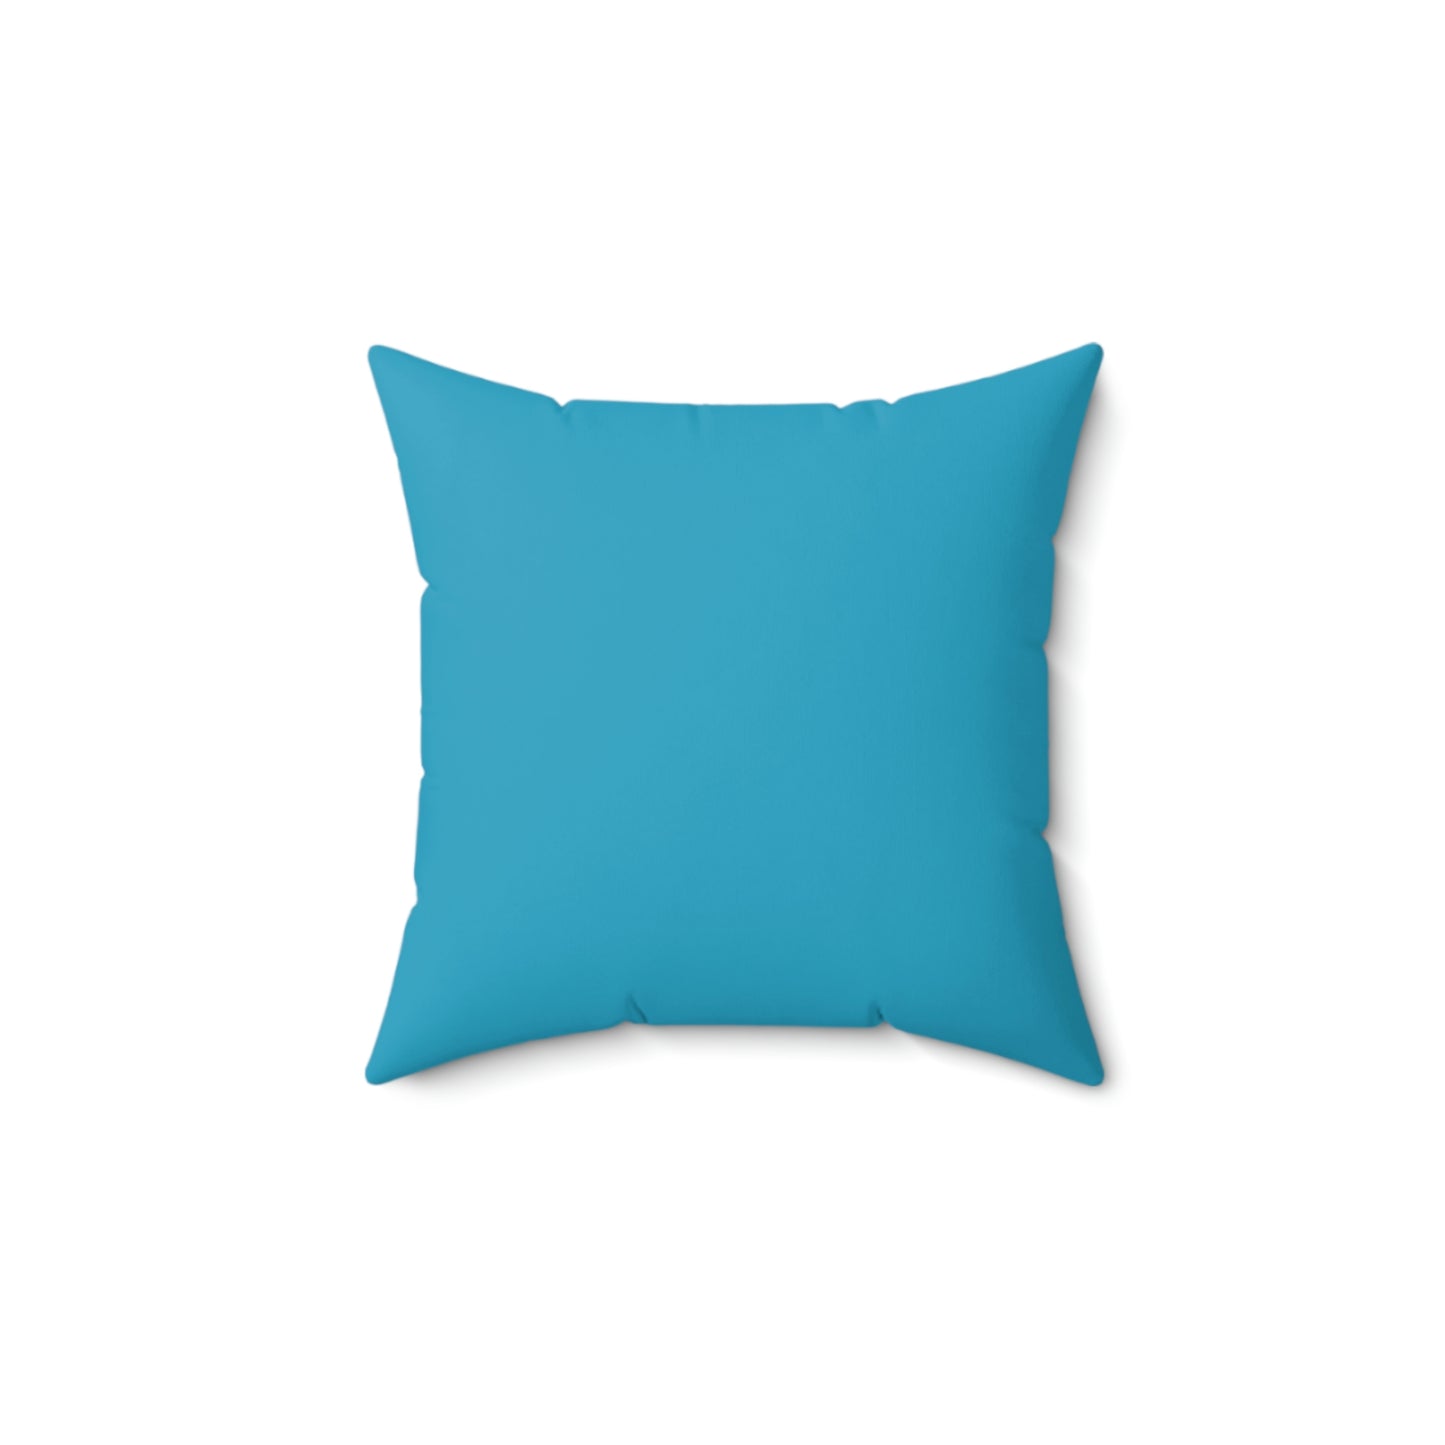 Spun Polyester Square Pillow Case “Storm Trooper White on Turquoise”